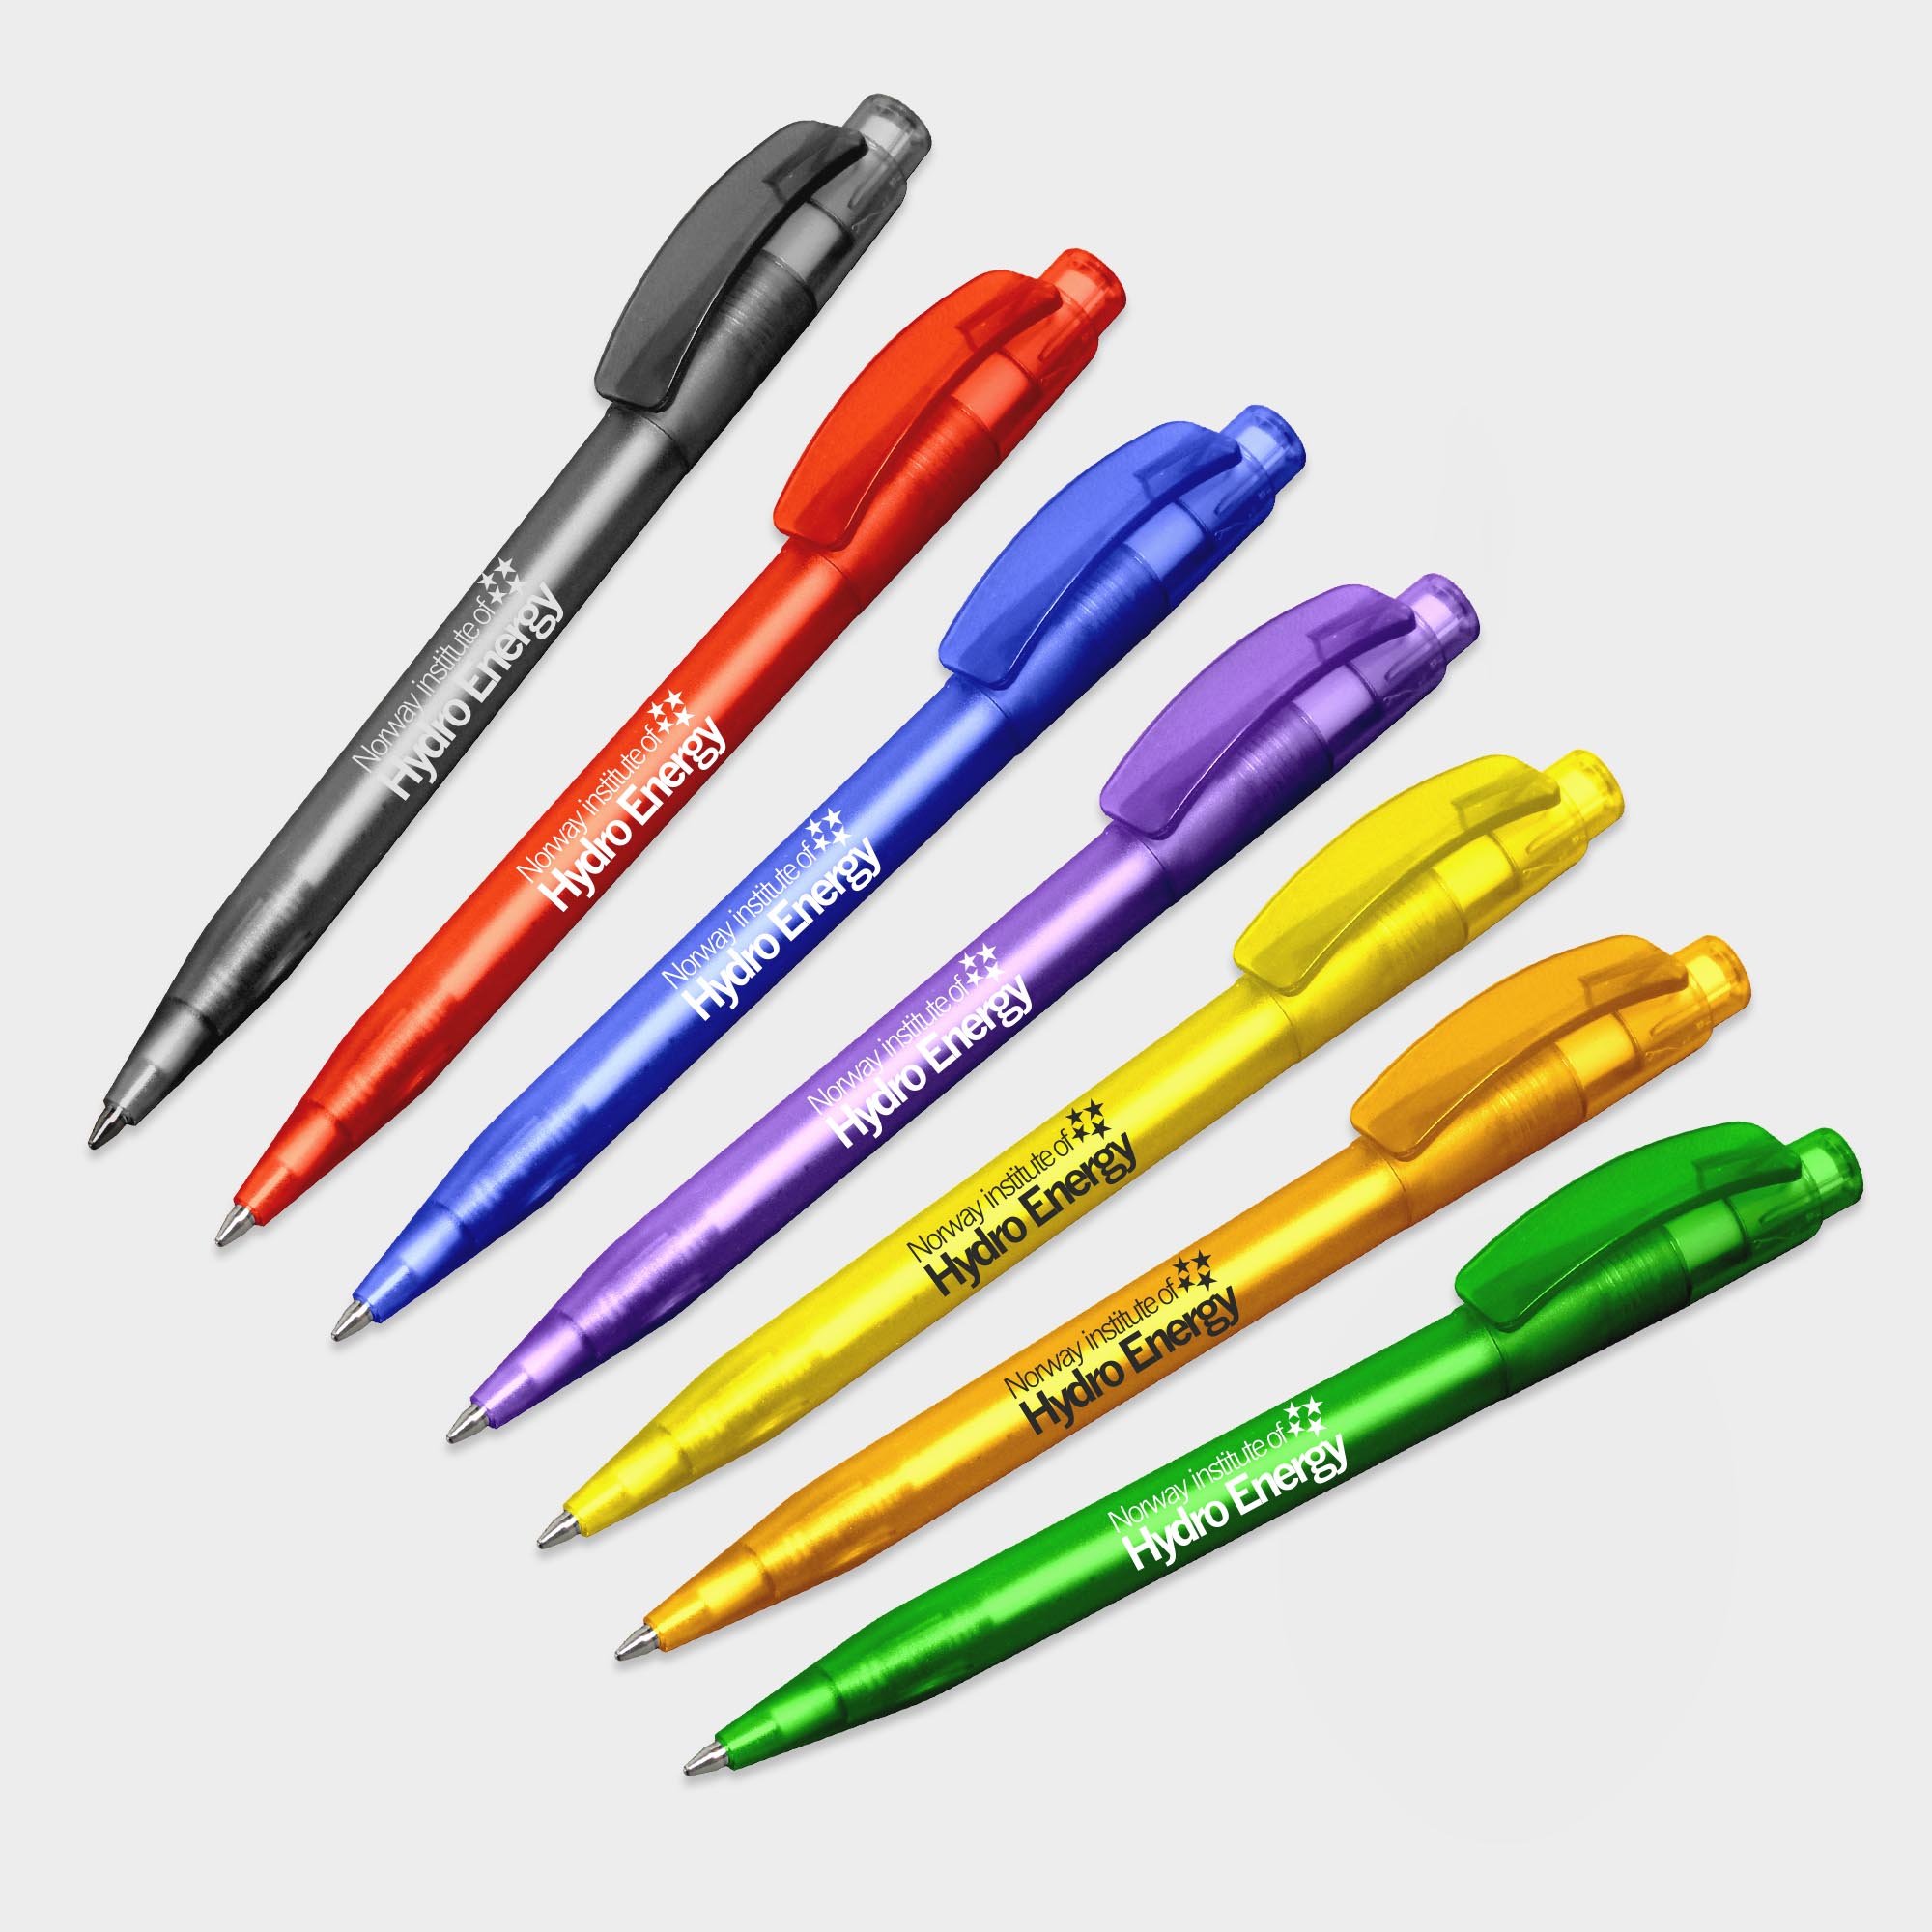 The Green & Good Indus Pen made from biodegradable plastic. Push button pen in a variety of colours. Black ink as standard.